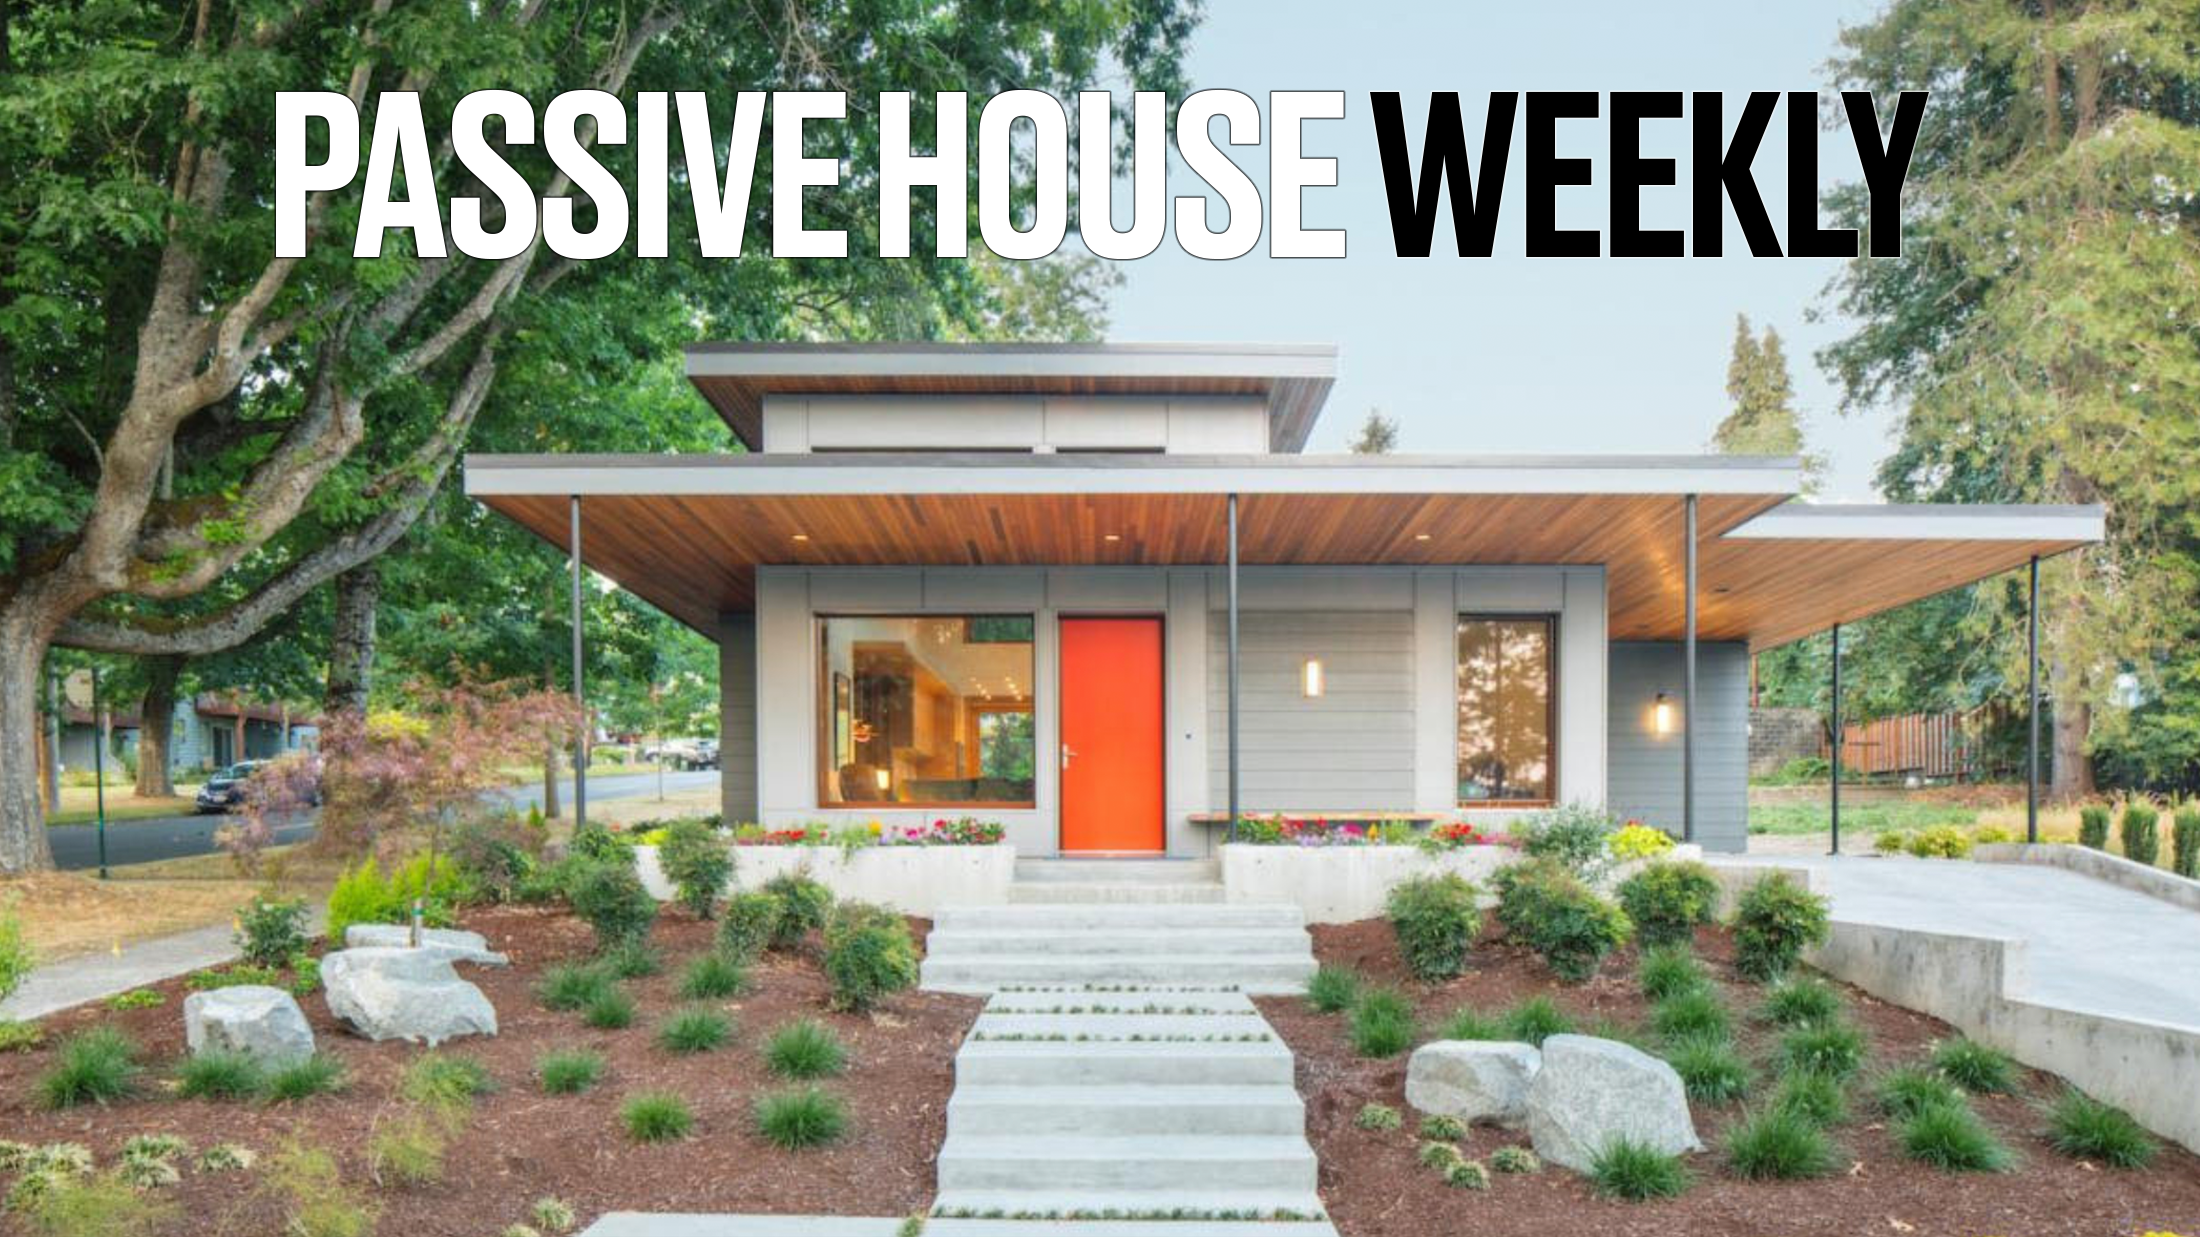 Passive House Weekly: September 19, 2022